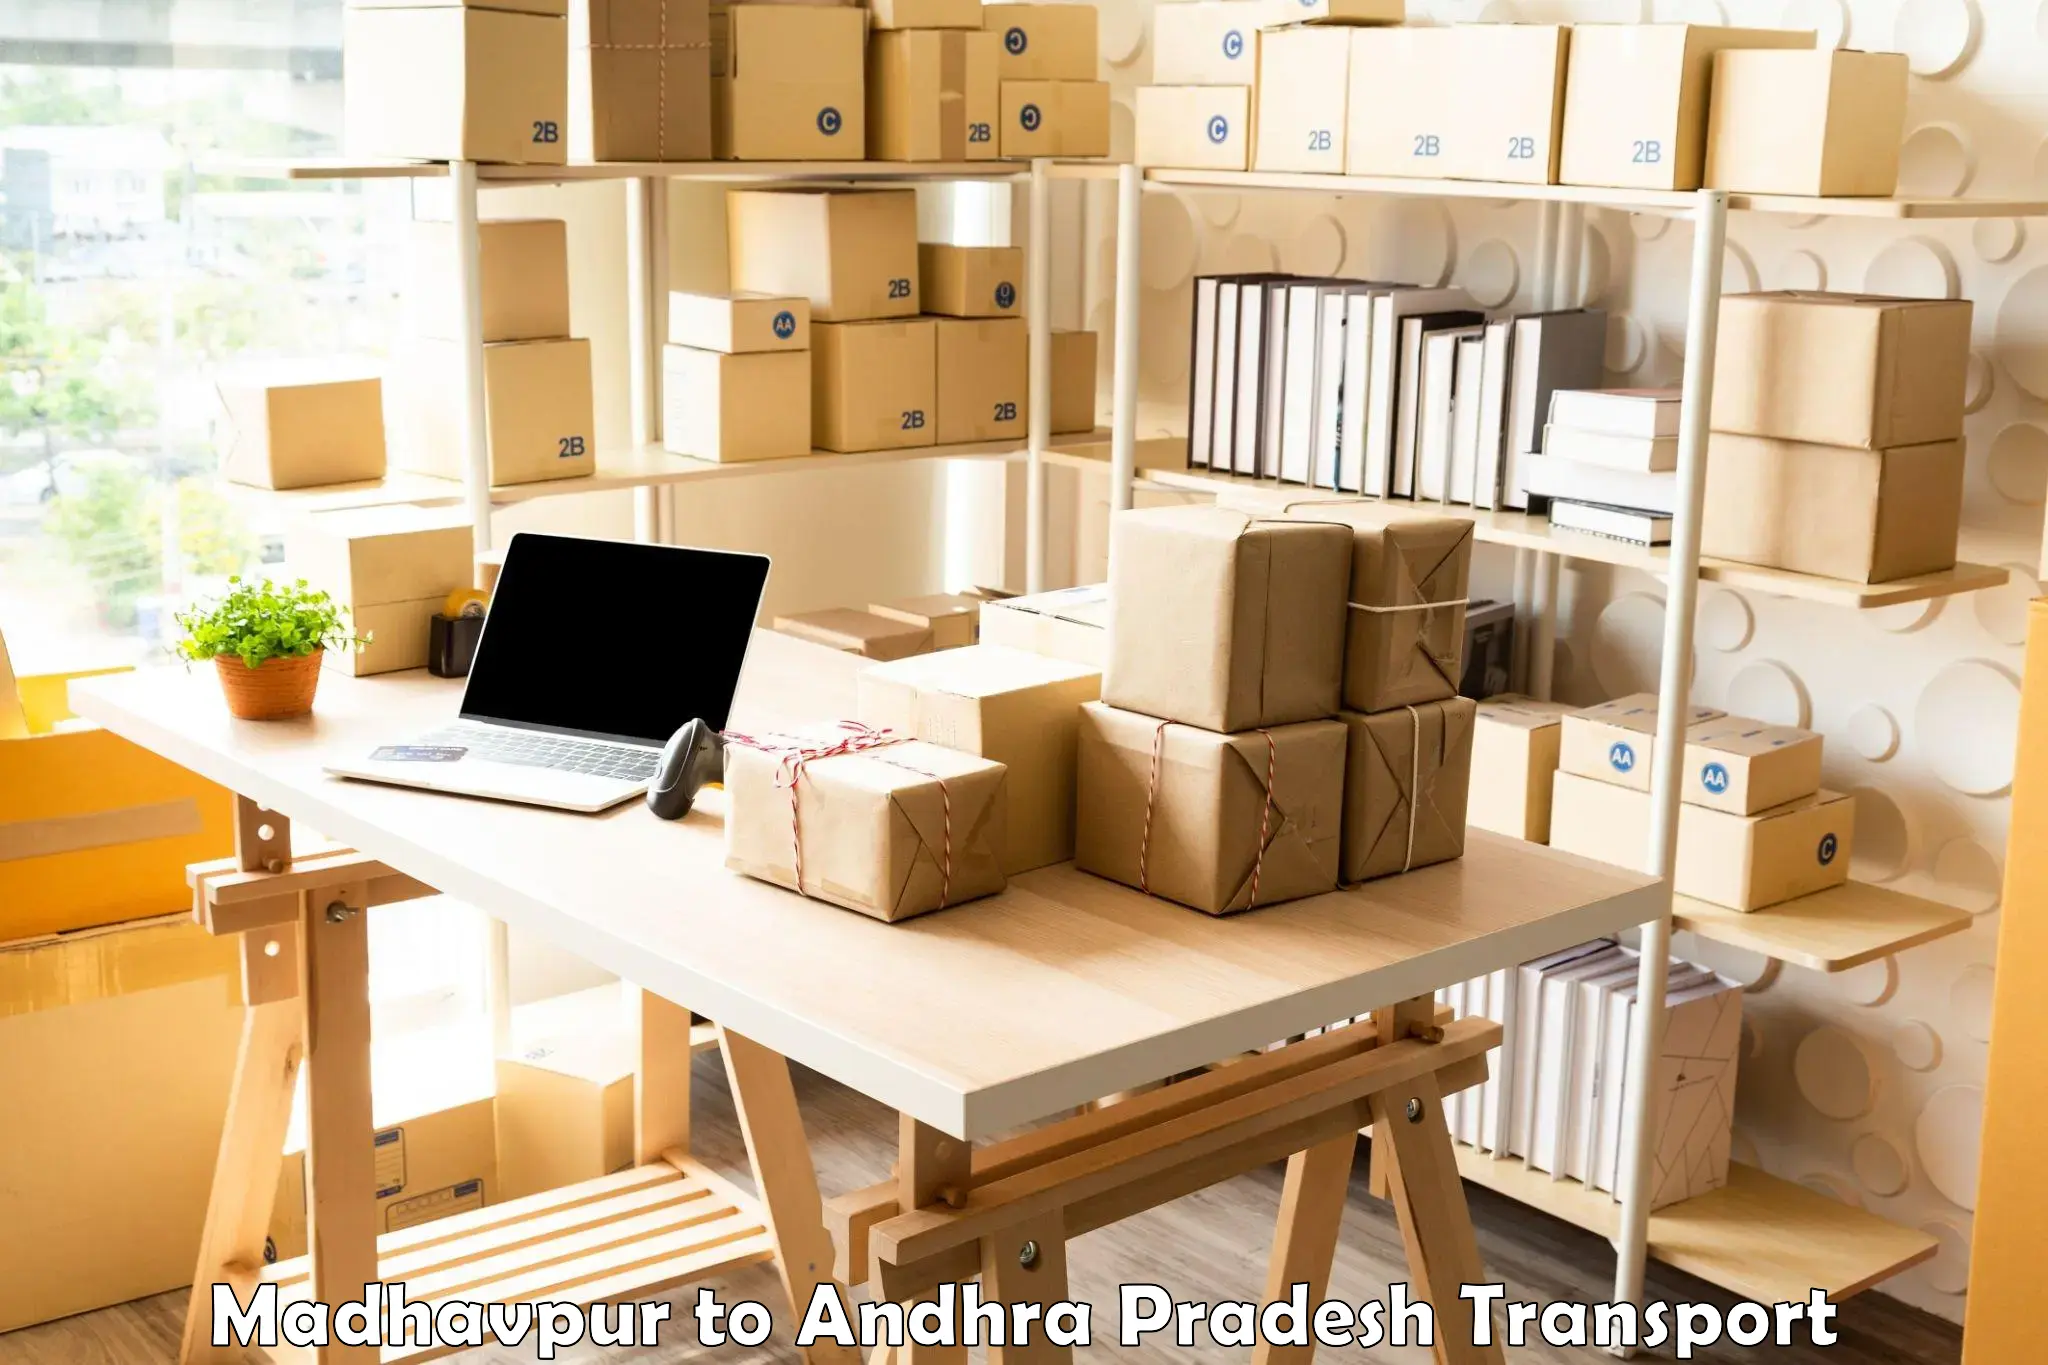 Vehicle transport services in Madhavpur to Palasa